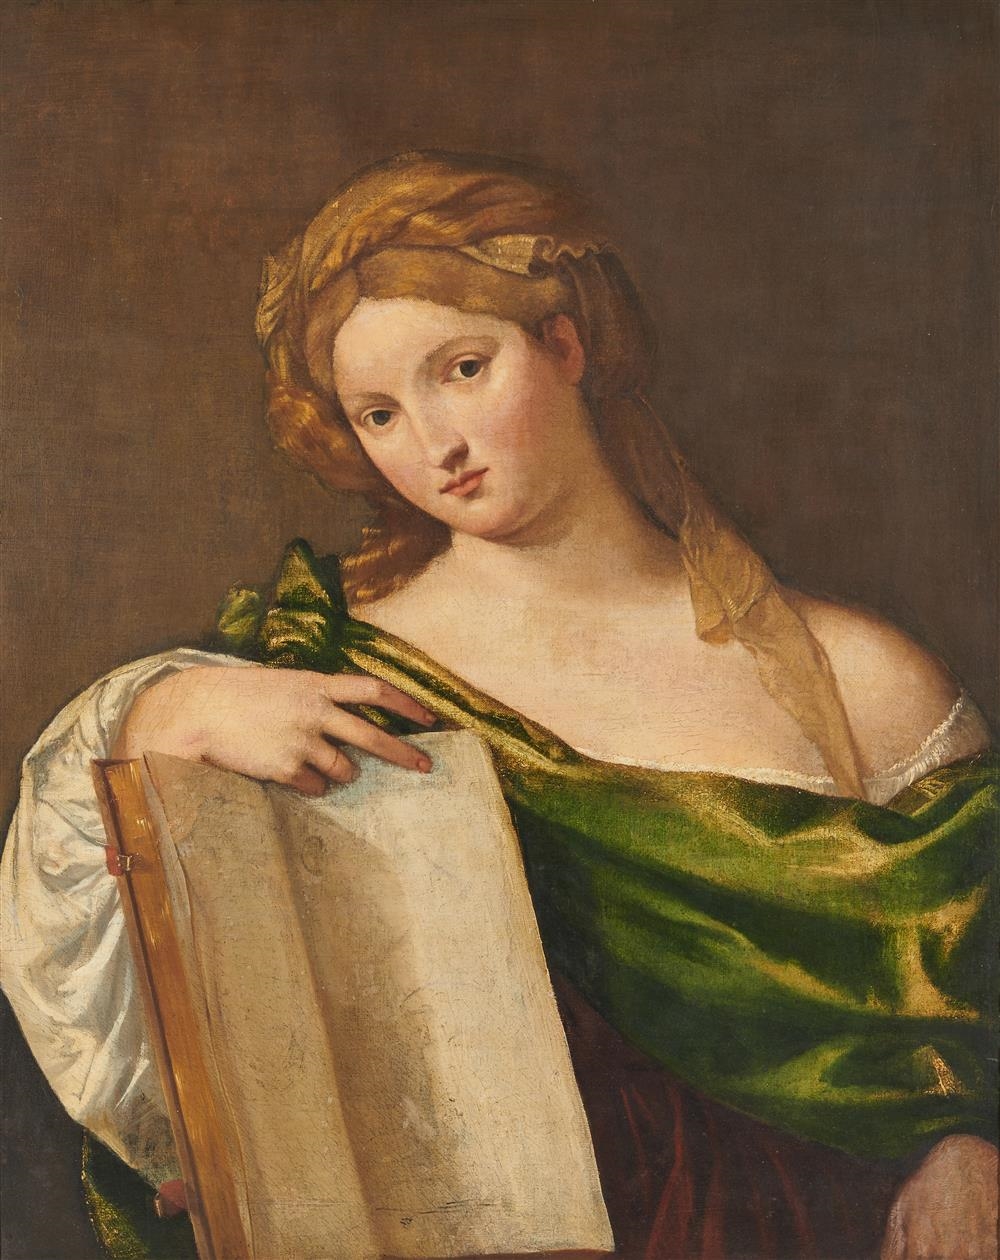 Artwork by Jacopo Palma il Vecchio, A Sibyl, Made of oil on canvas